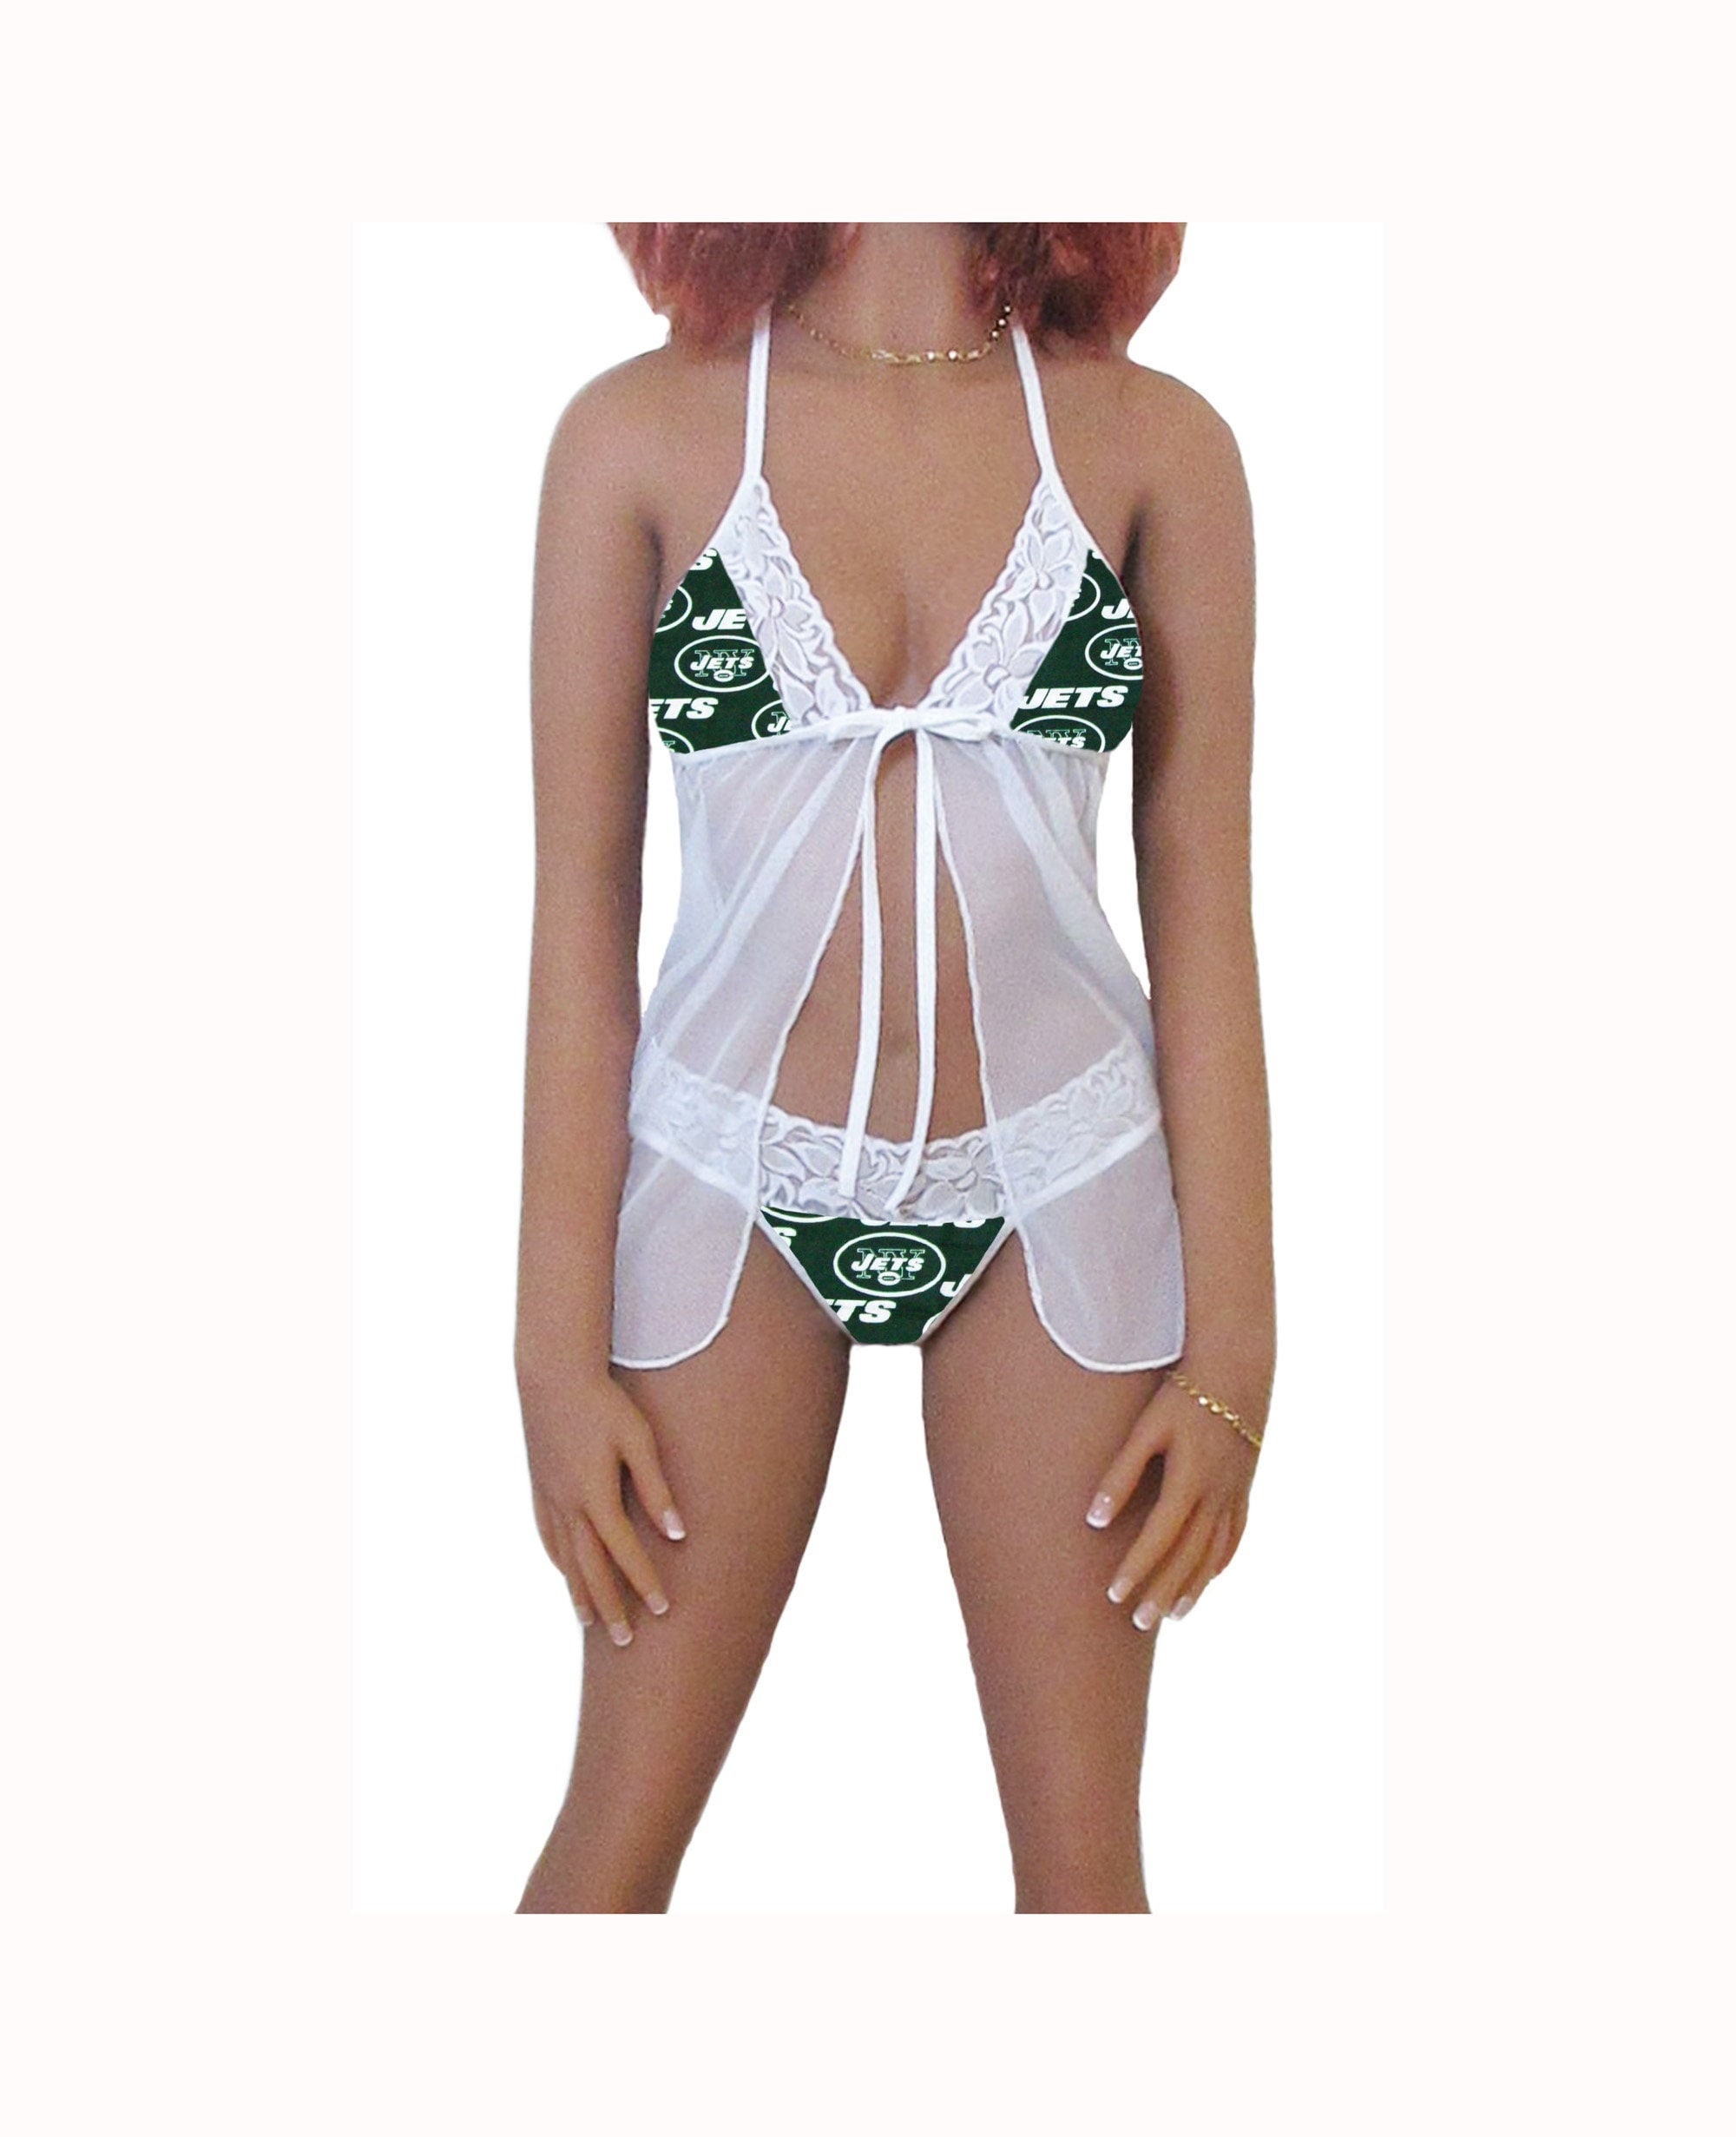 Jets Lingerie White Lace Babydoll and String Panty, New York Jets